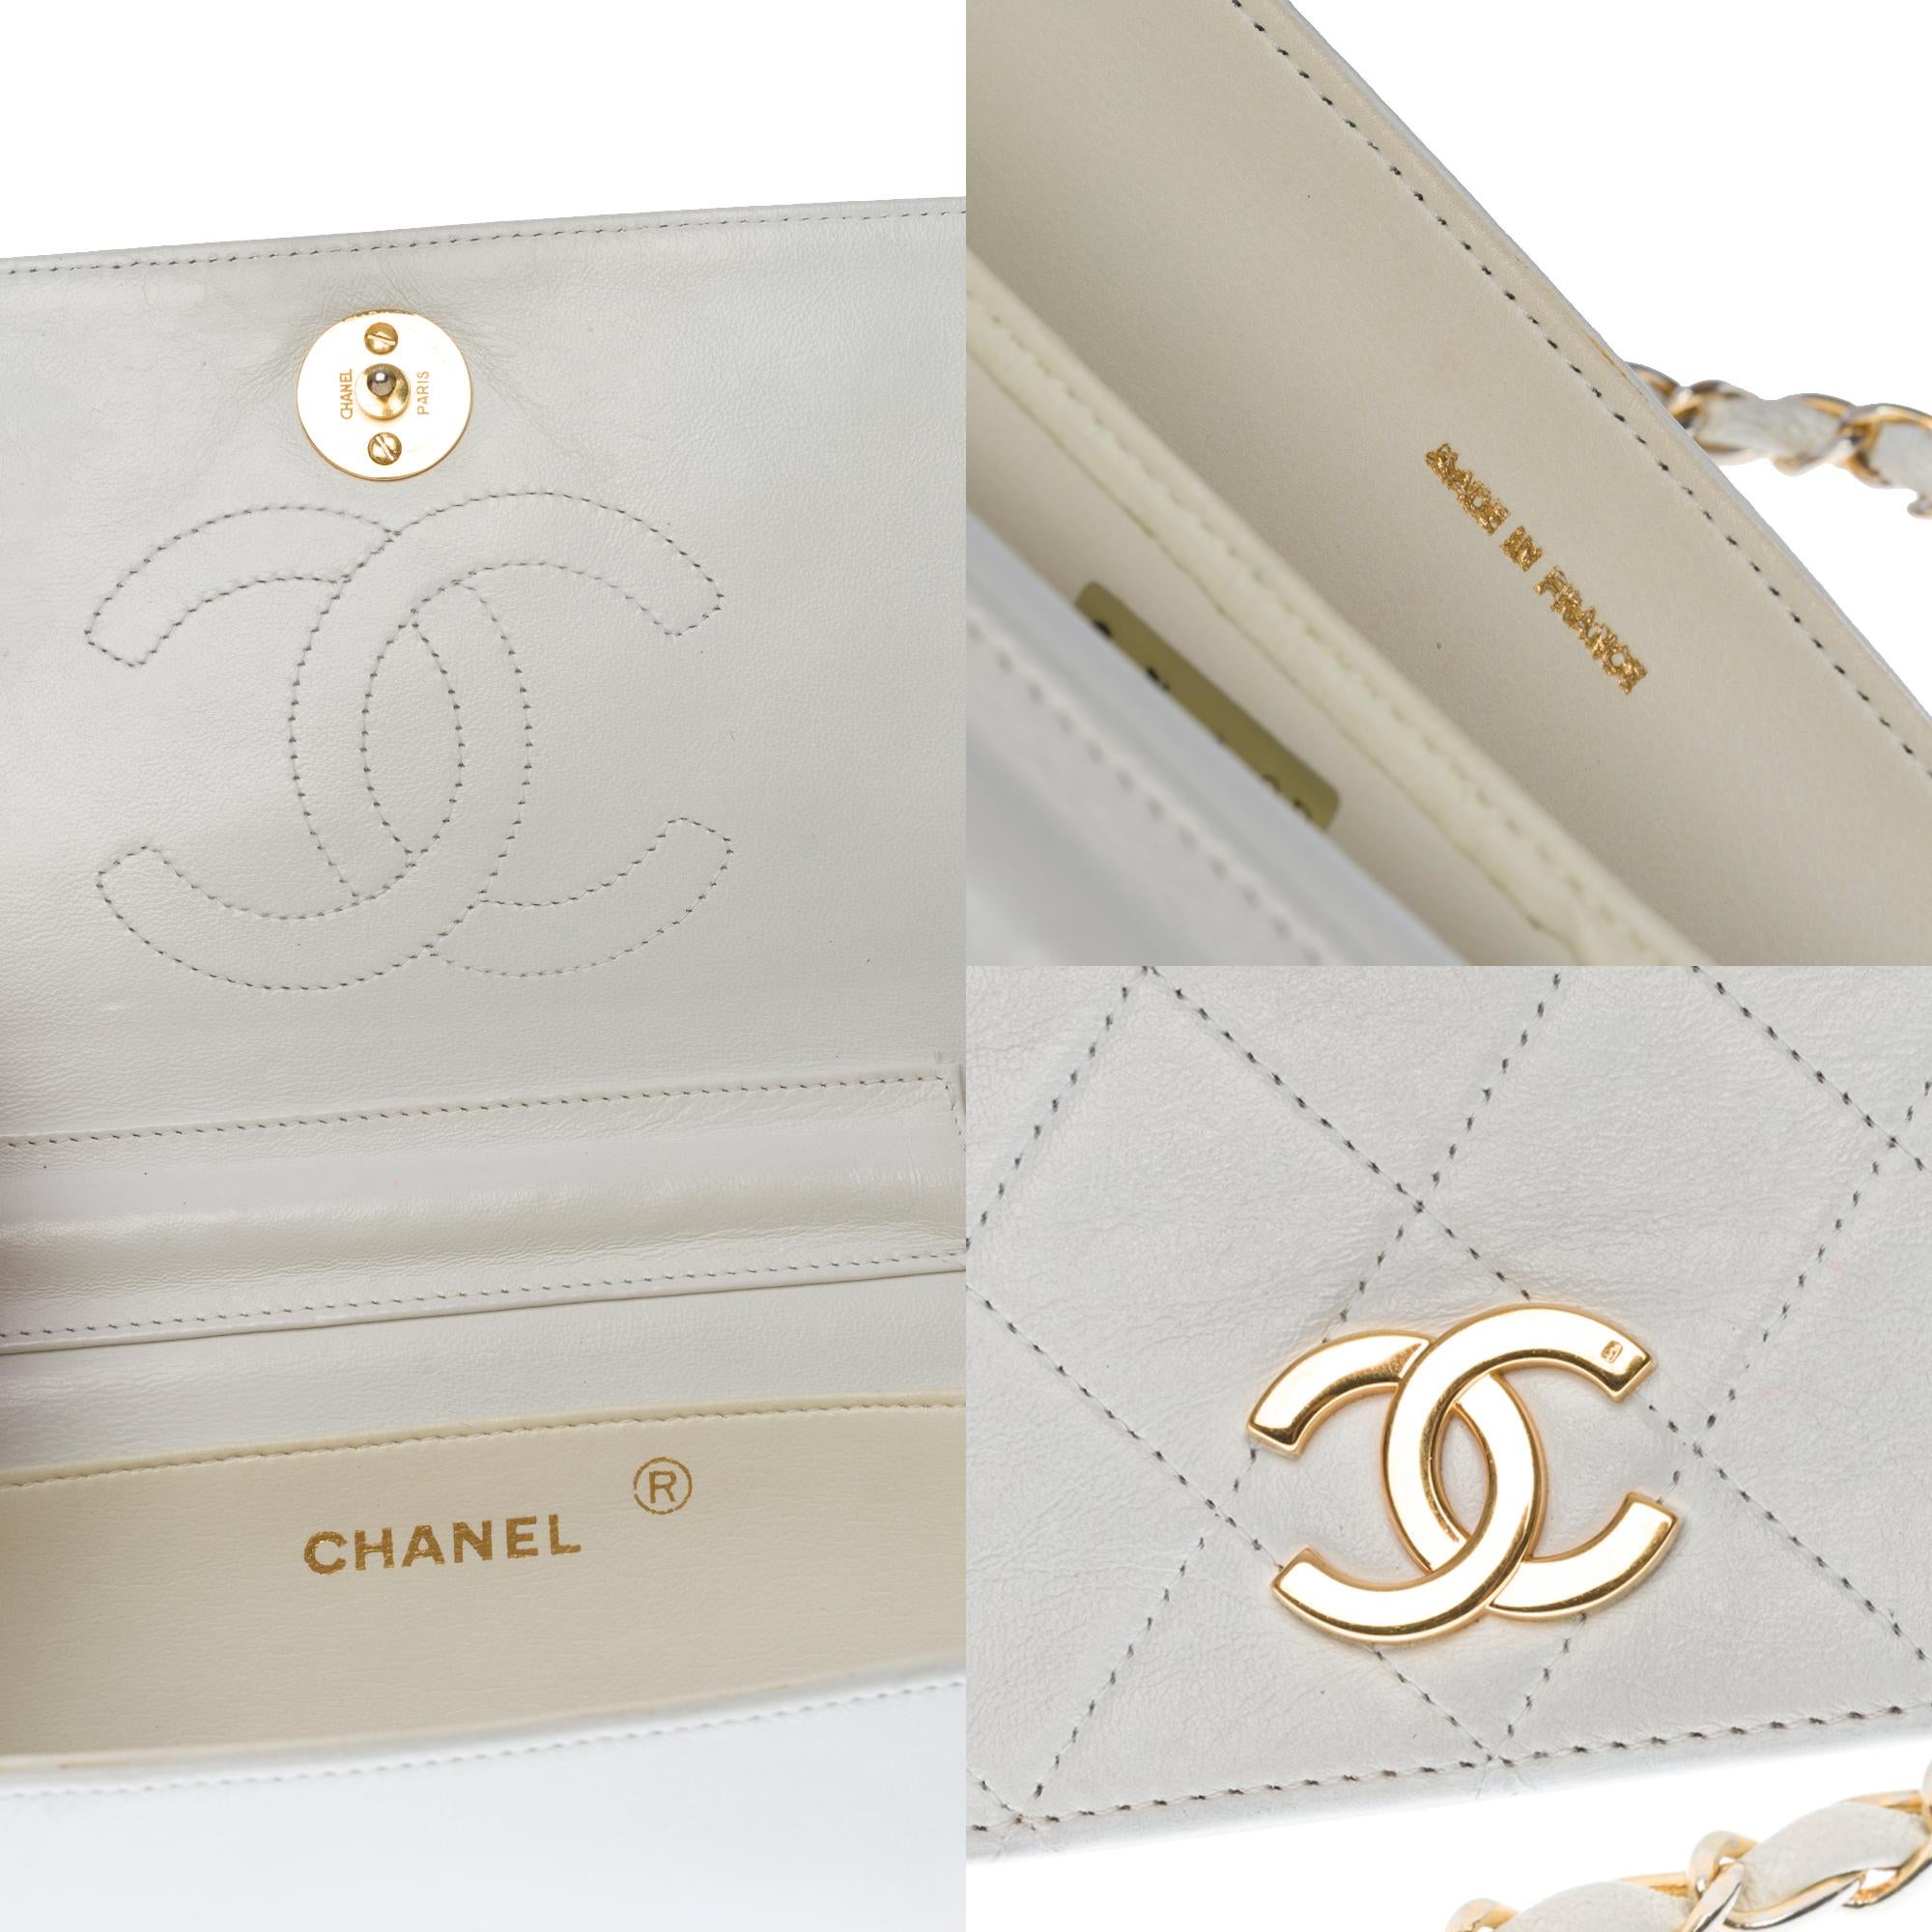 Women's Chanel Full flap Mini shoulder bag in white quilted lambskin, GHW